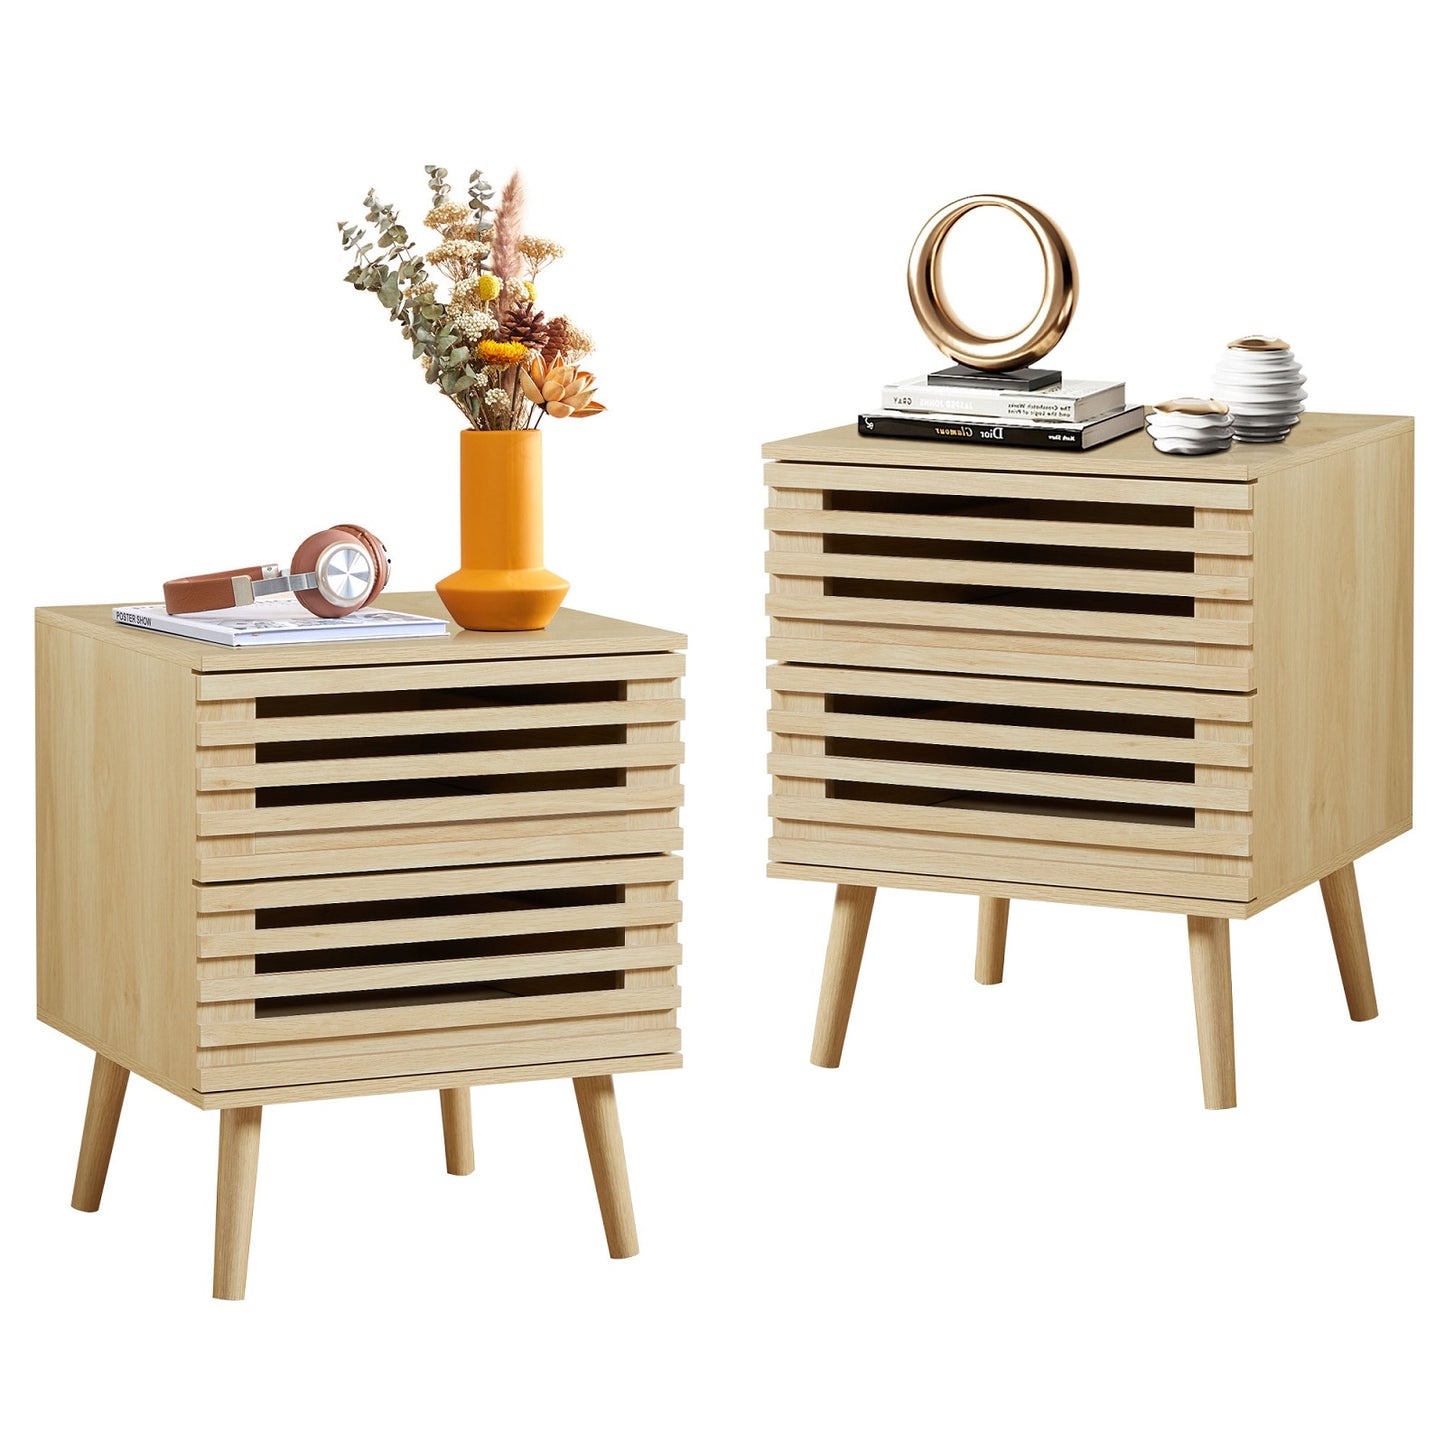 Algherohein Bedroom Wood Nightstand Set of 2 with Hollowed-Out Drawer,Living Room Side Tables